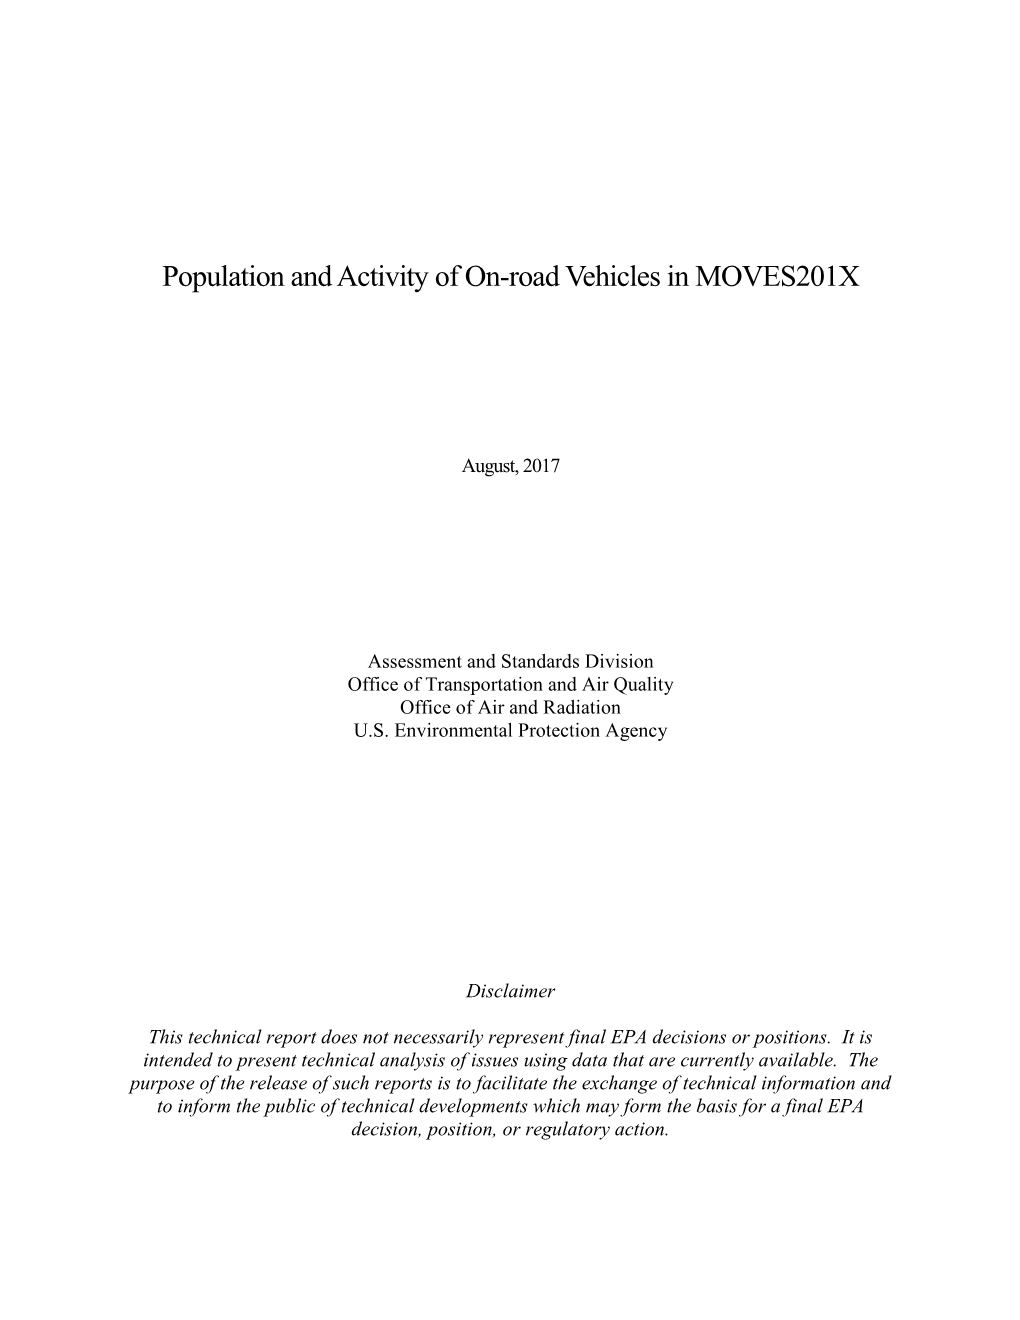 Population and Activity of On-Road Vehicles in MOVES201X